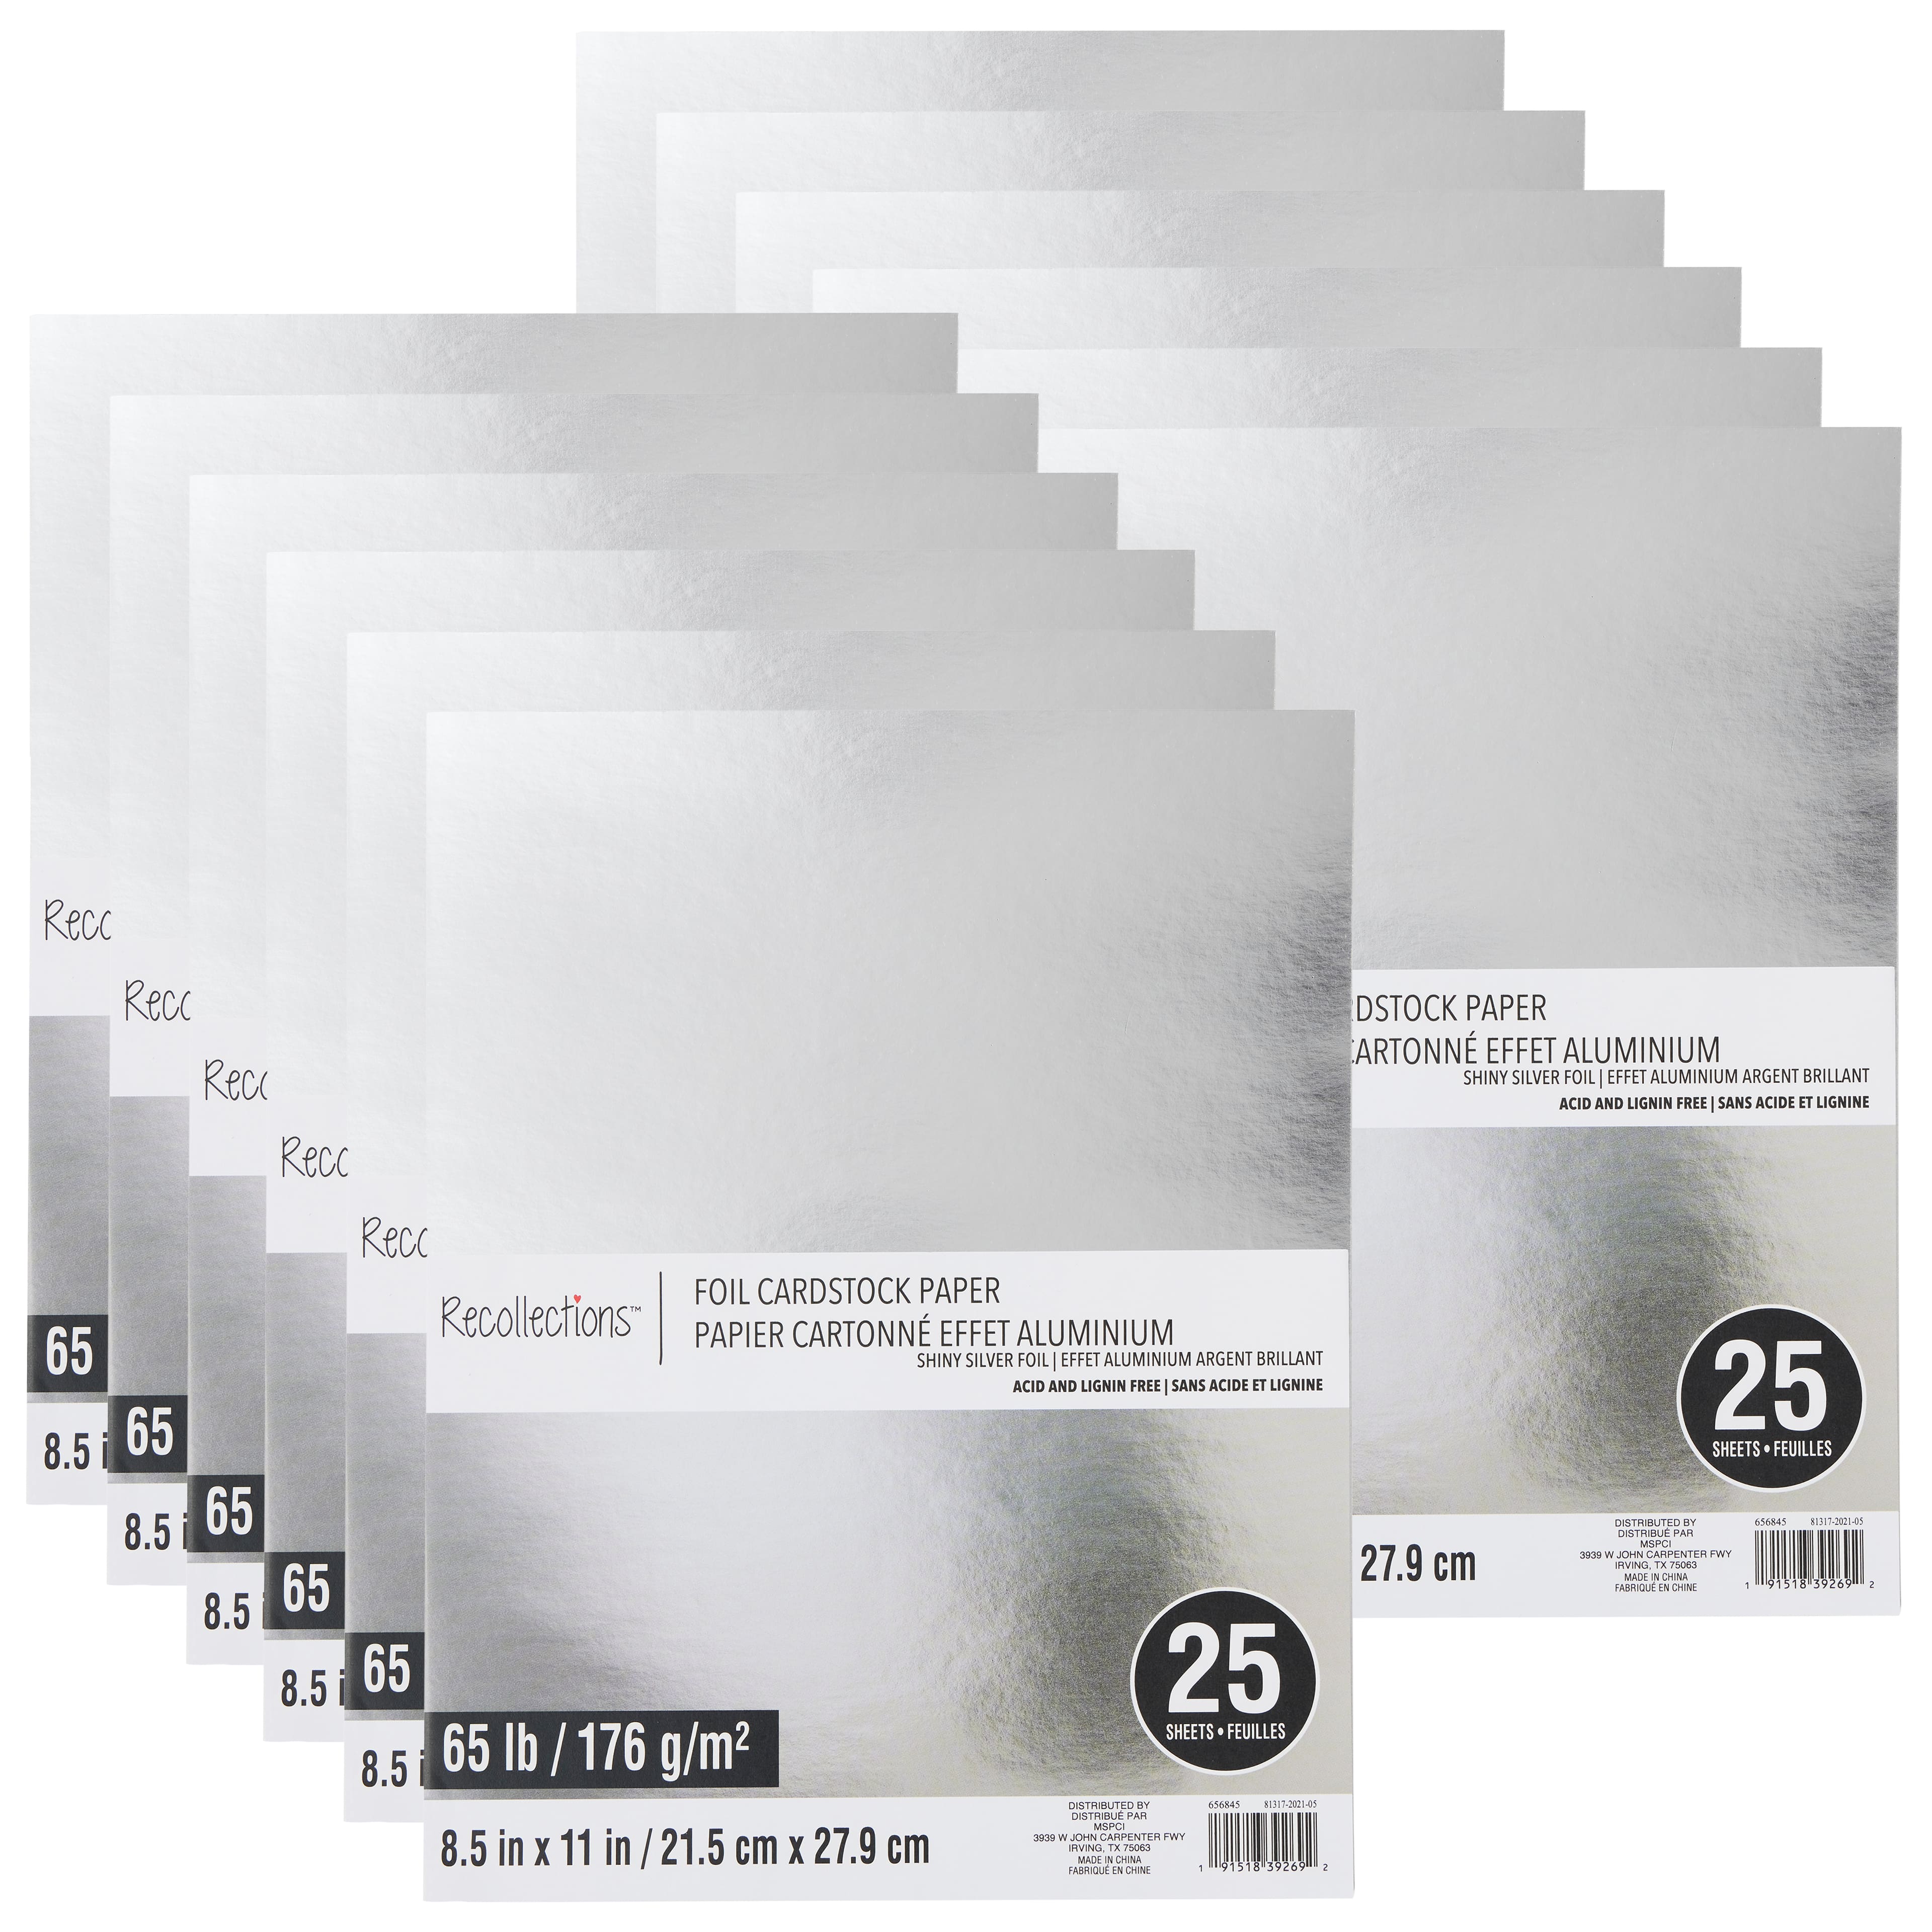 12 x 12 Cardstock Paper by Recollections™, 25 Sheets, Michaels